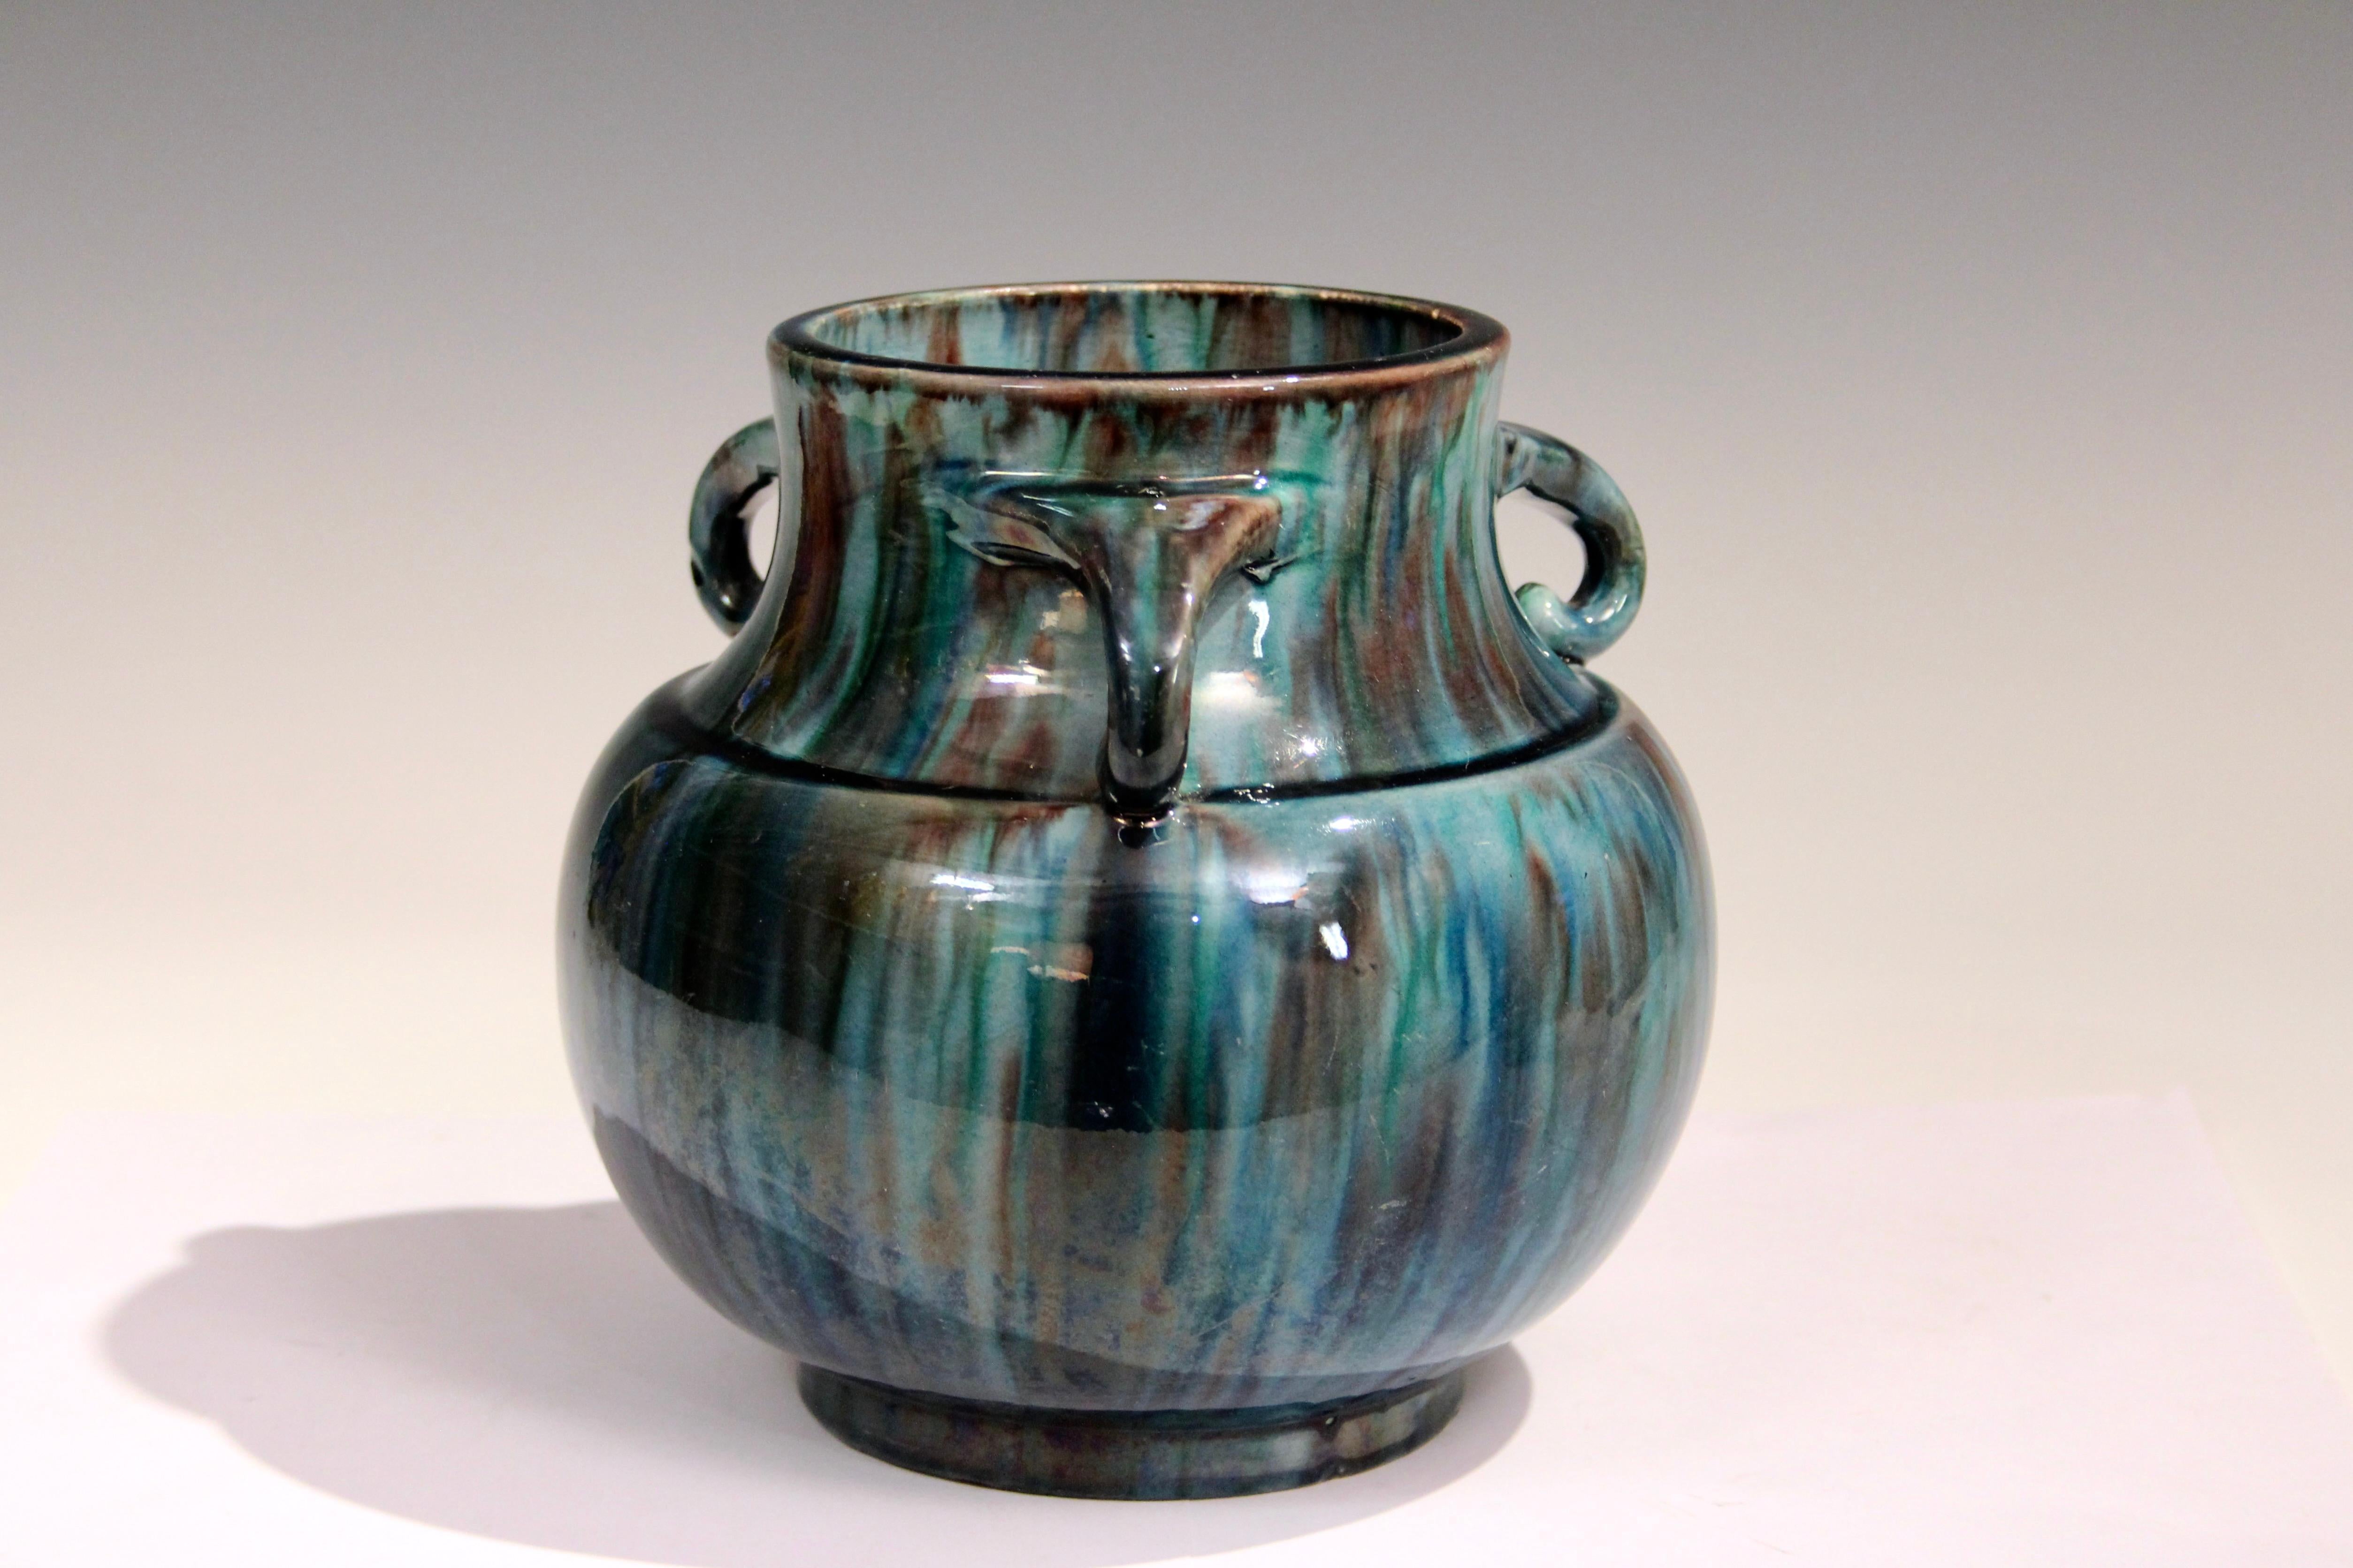 Awaji Pottery vase in Art Deco form with three handles curling down from the neck to join the shoulder, and striking blue flambe glaze, circa 1930. Impressed marks. 7 1/4